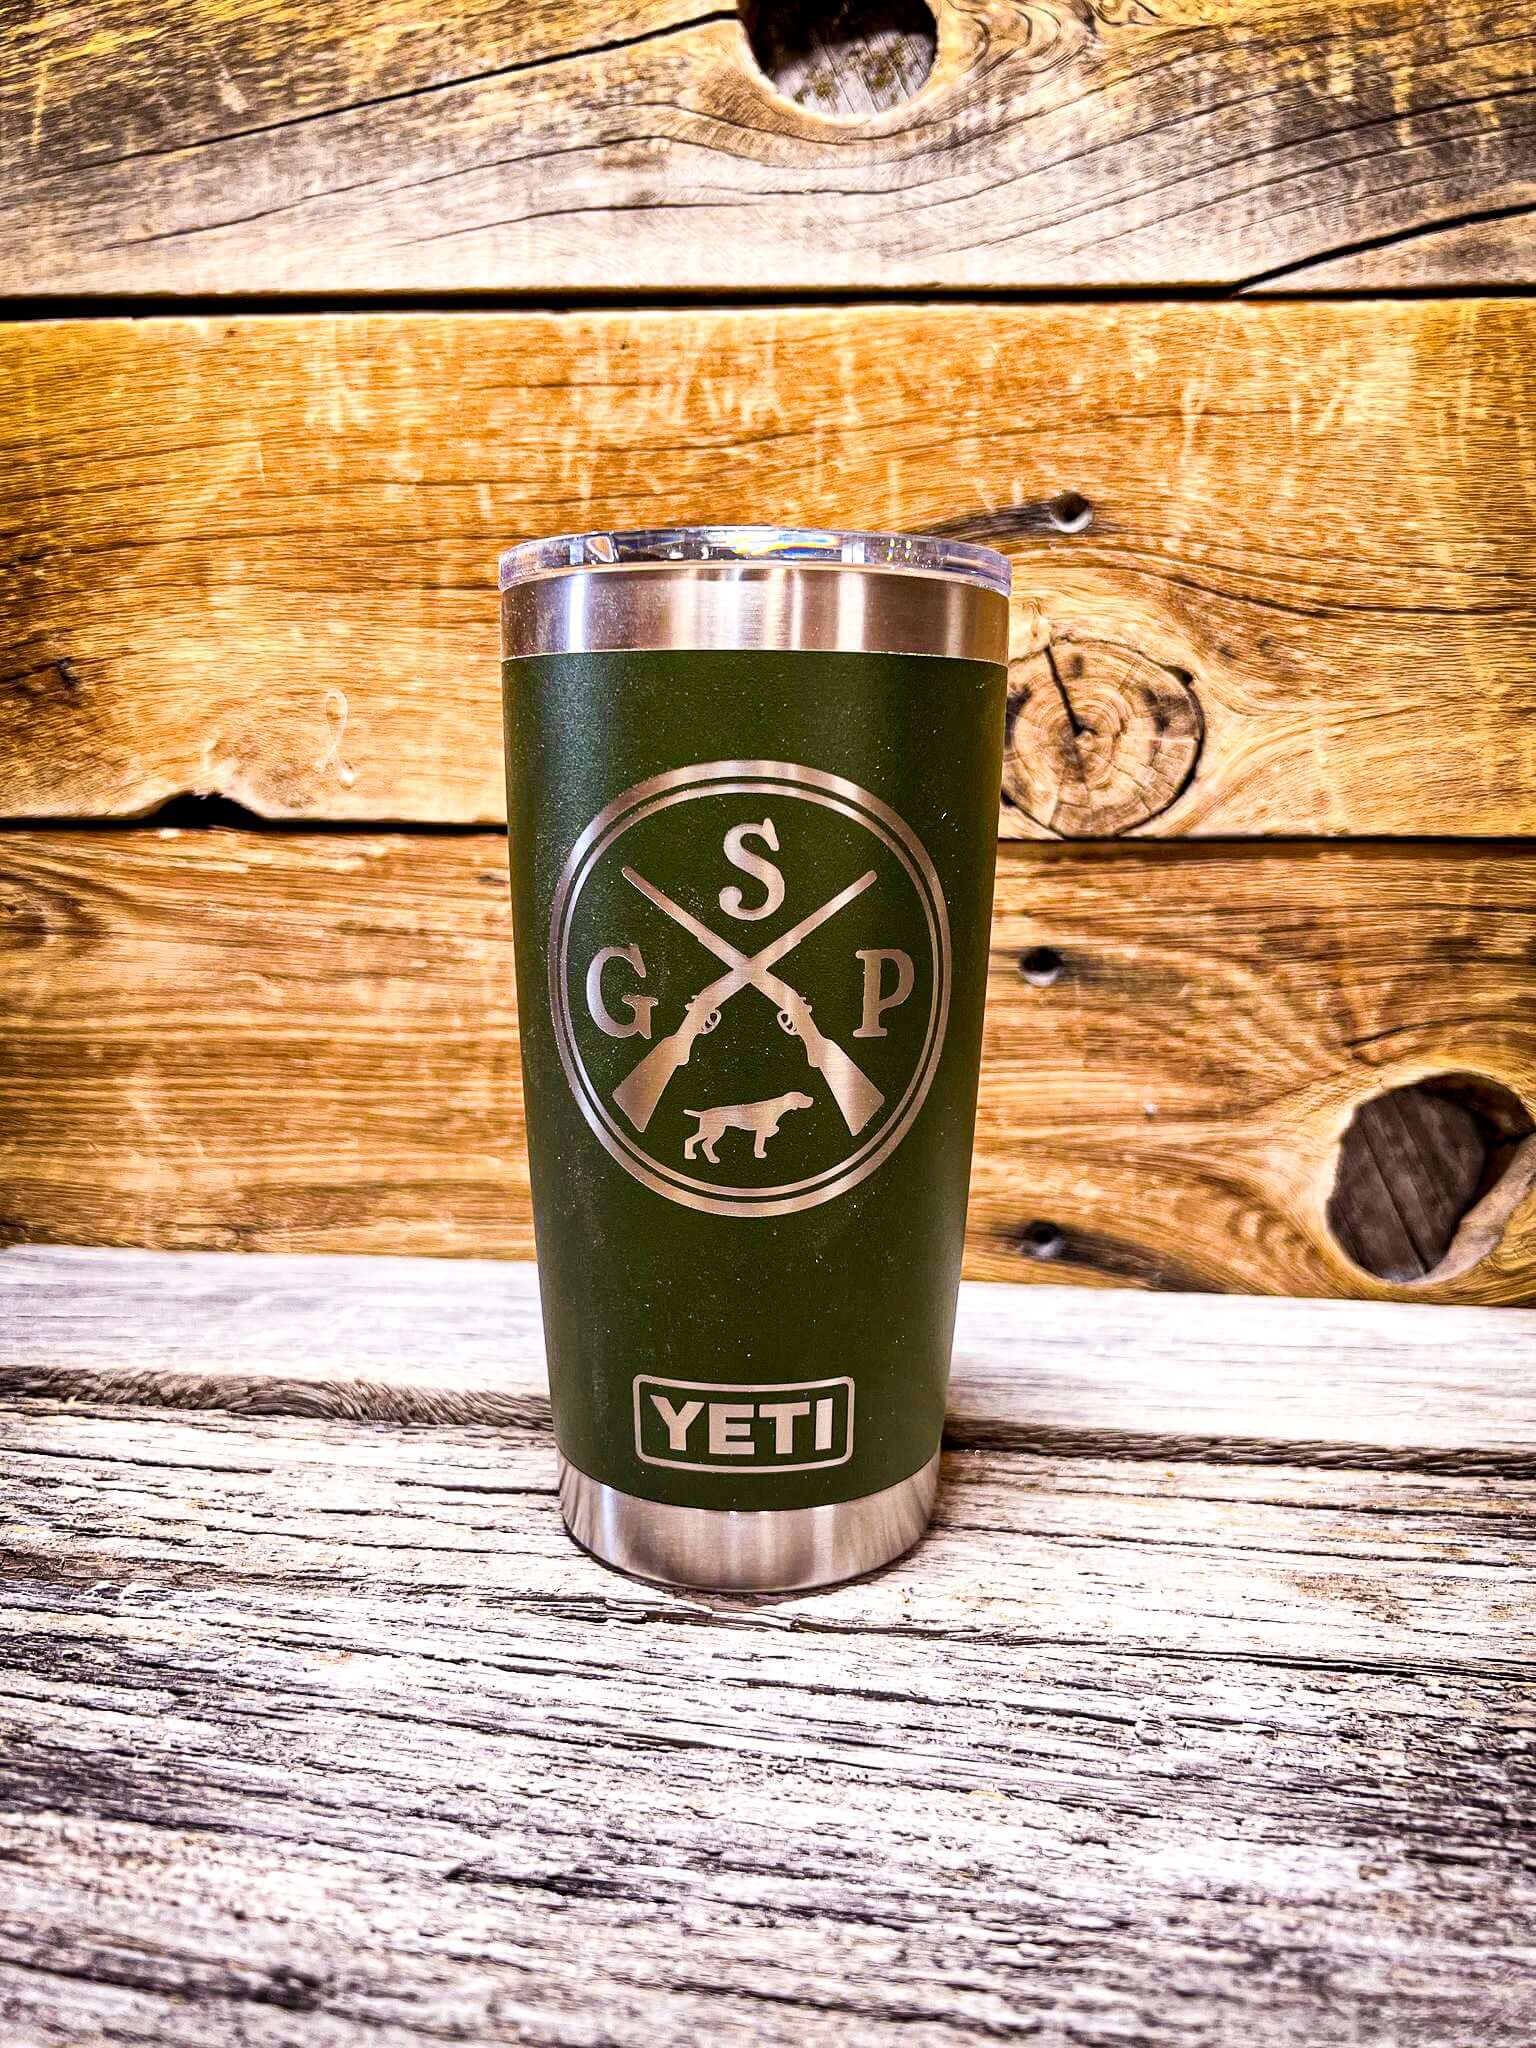 German shorthaired pointer (GSP) laser engraved artwork - silver on black Yeti Rambler tumbler on wood table with wood background